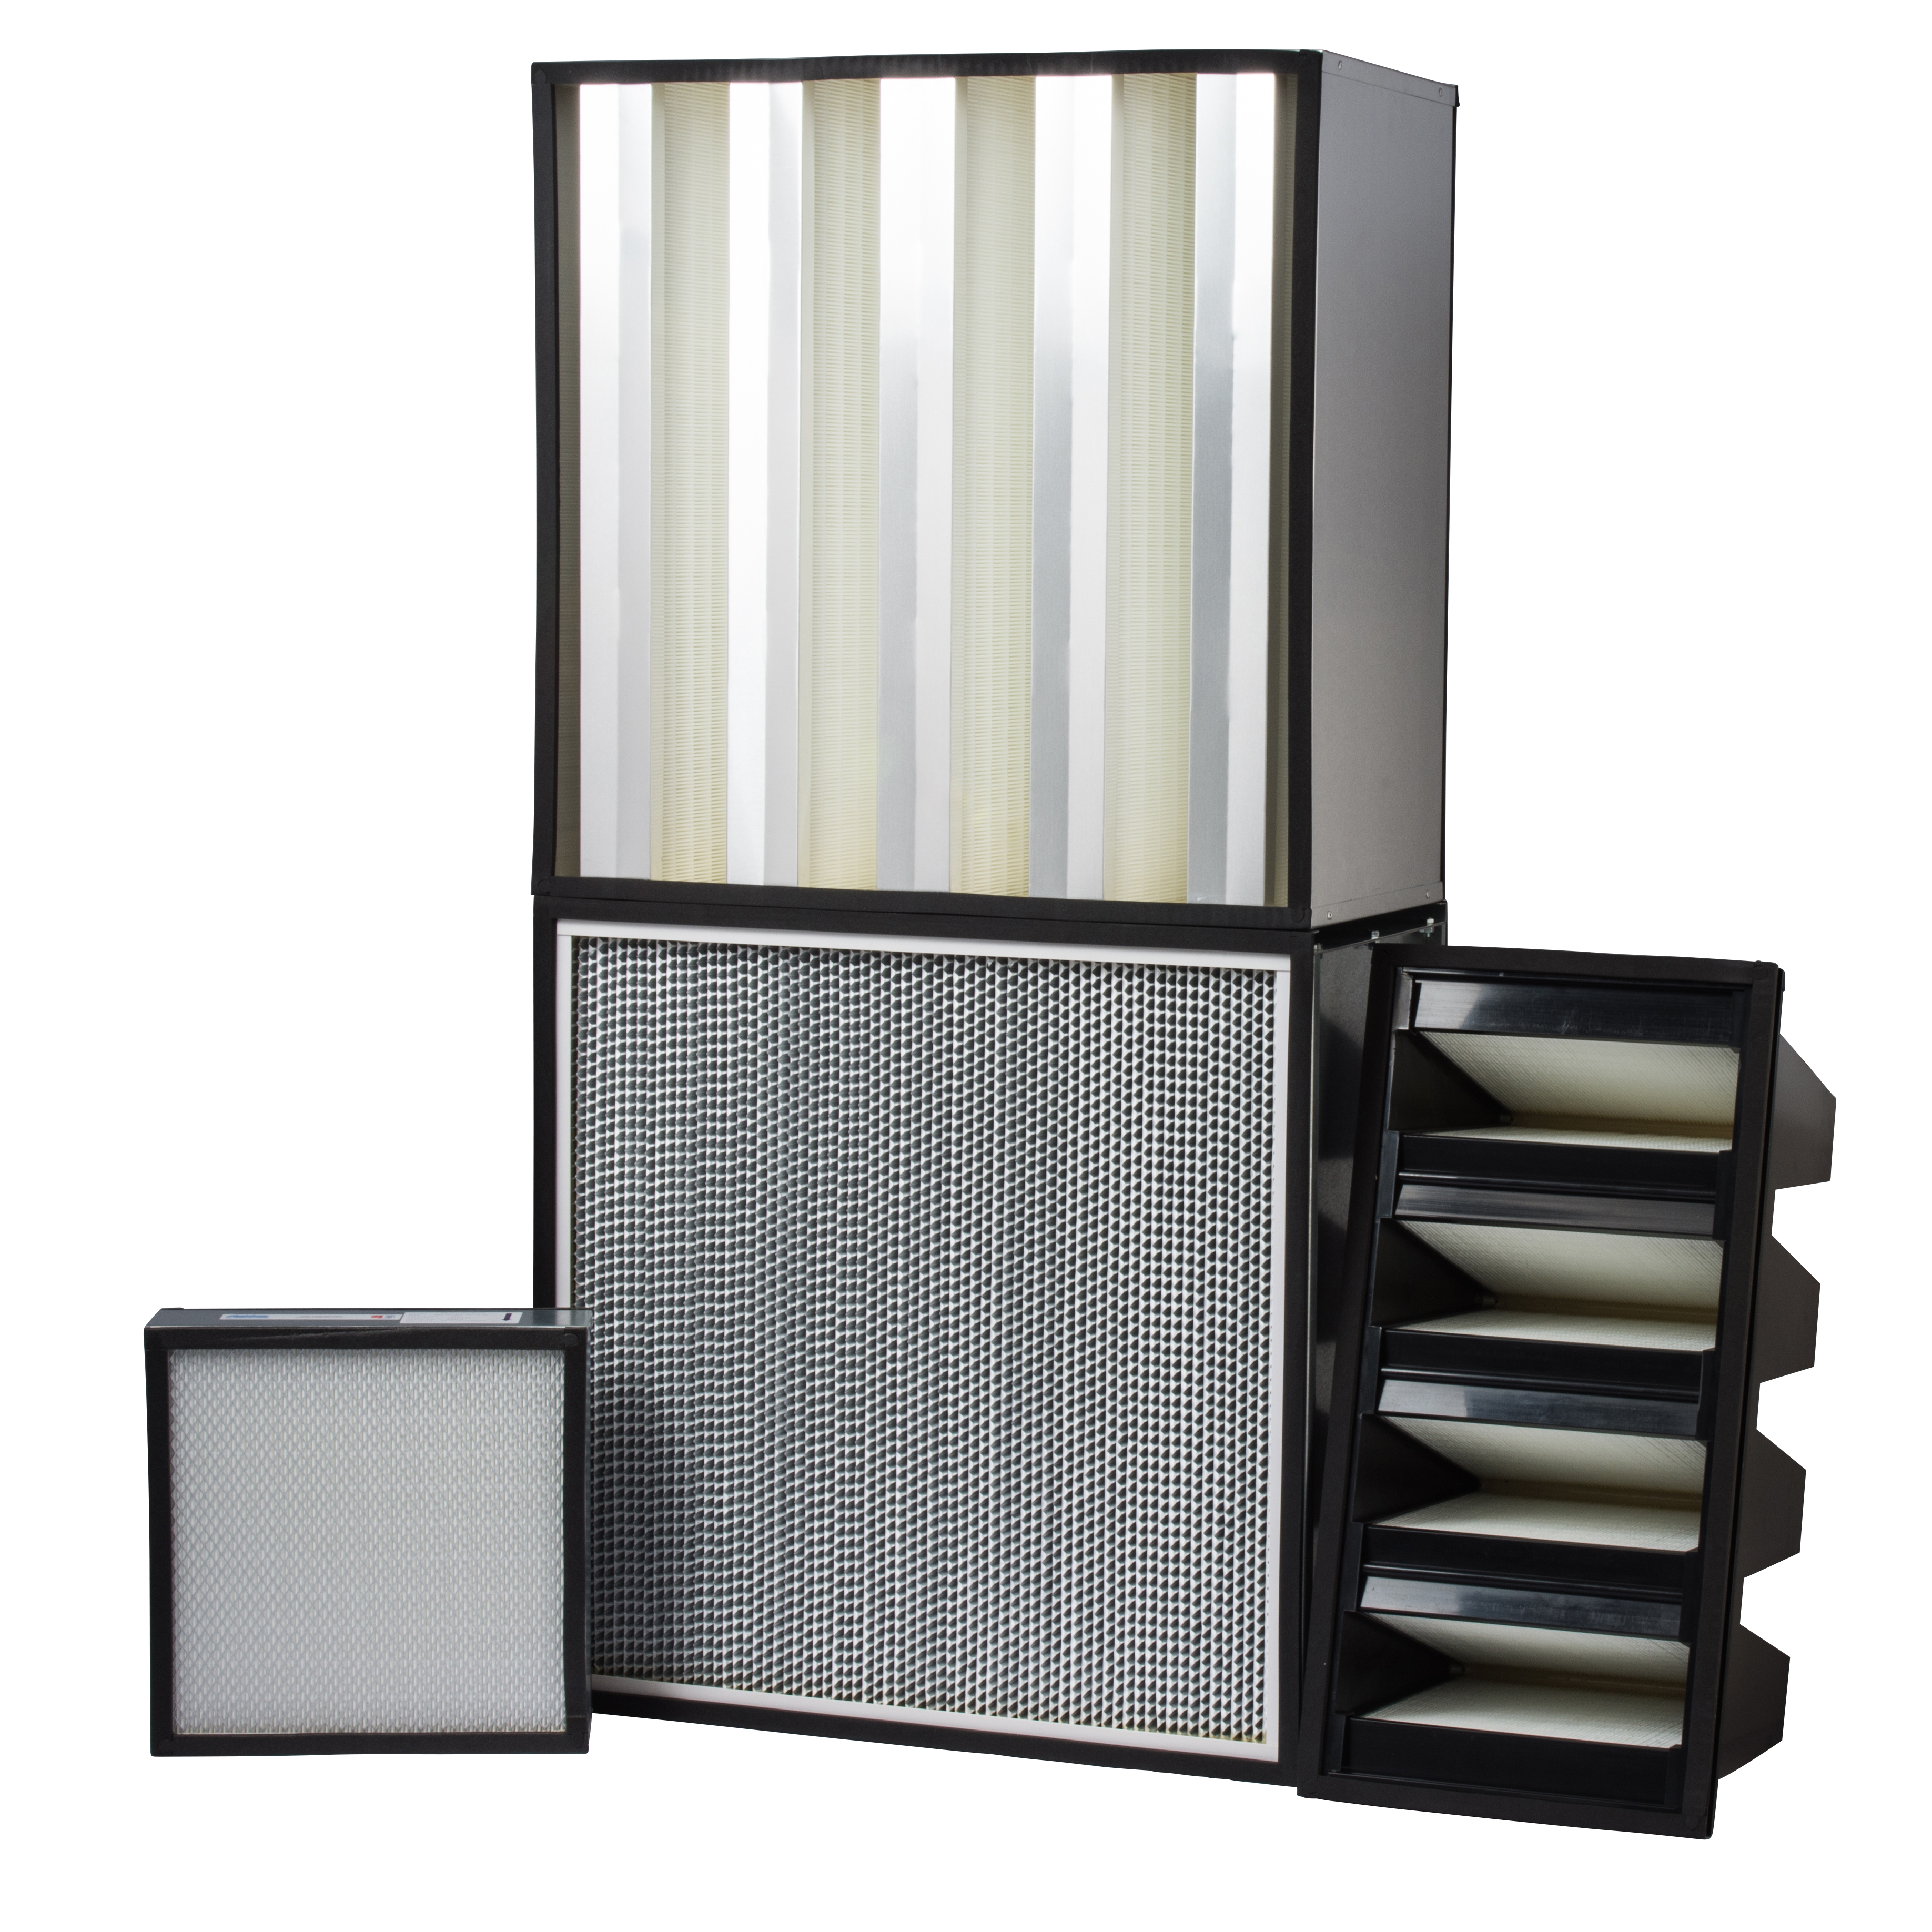 HEPA Filter Collection